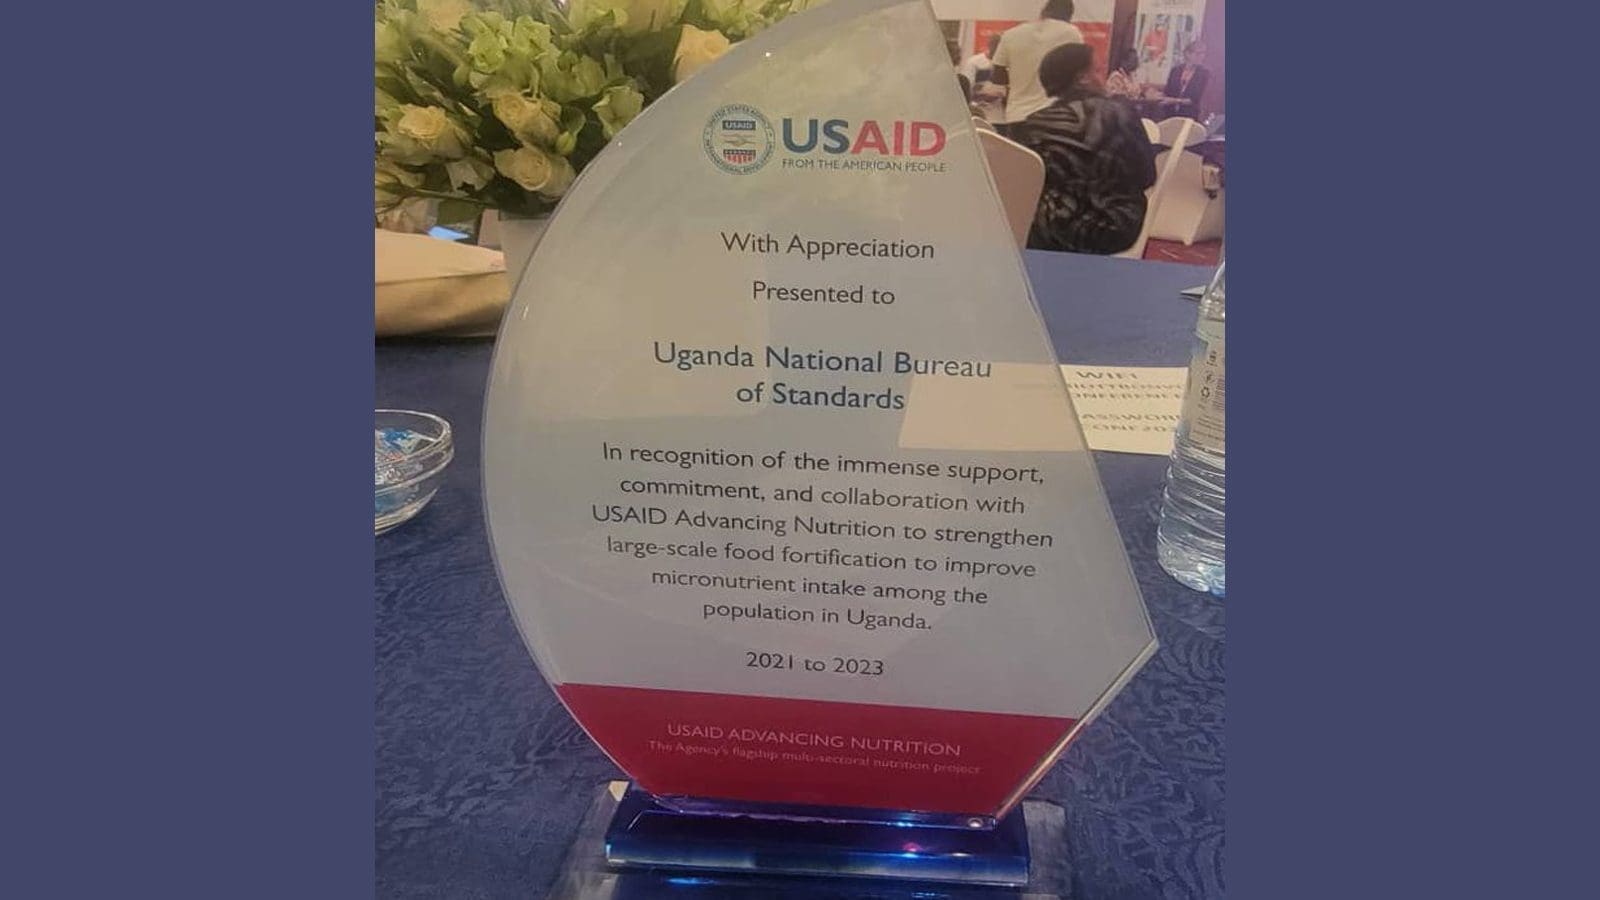 Uganda National Bureau of Standards recognized for advancing nutrition through food fortification